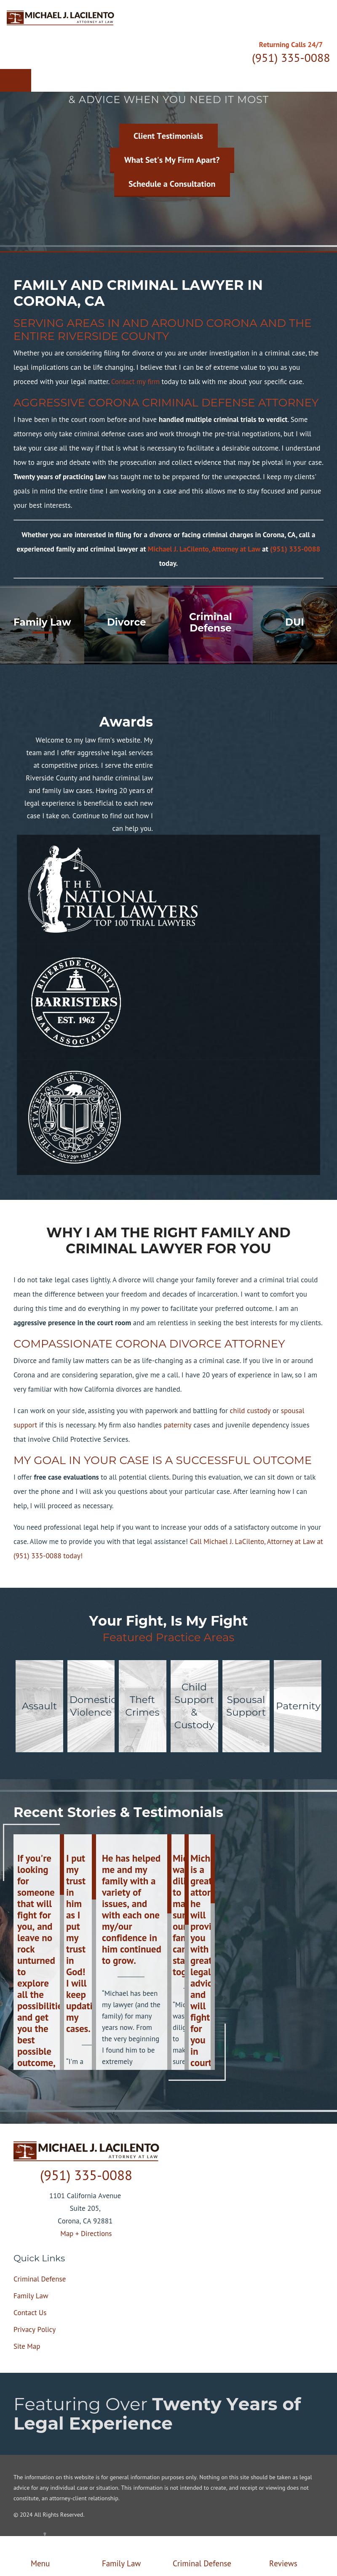 Law Office of Lucy M Bishop - Corona CA Lawyers